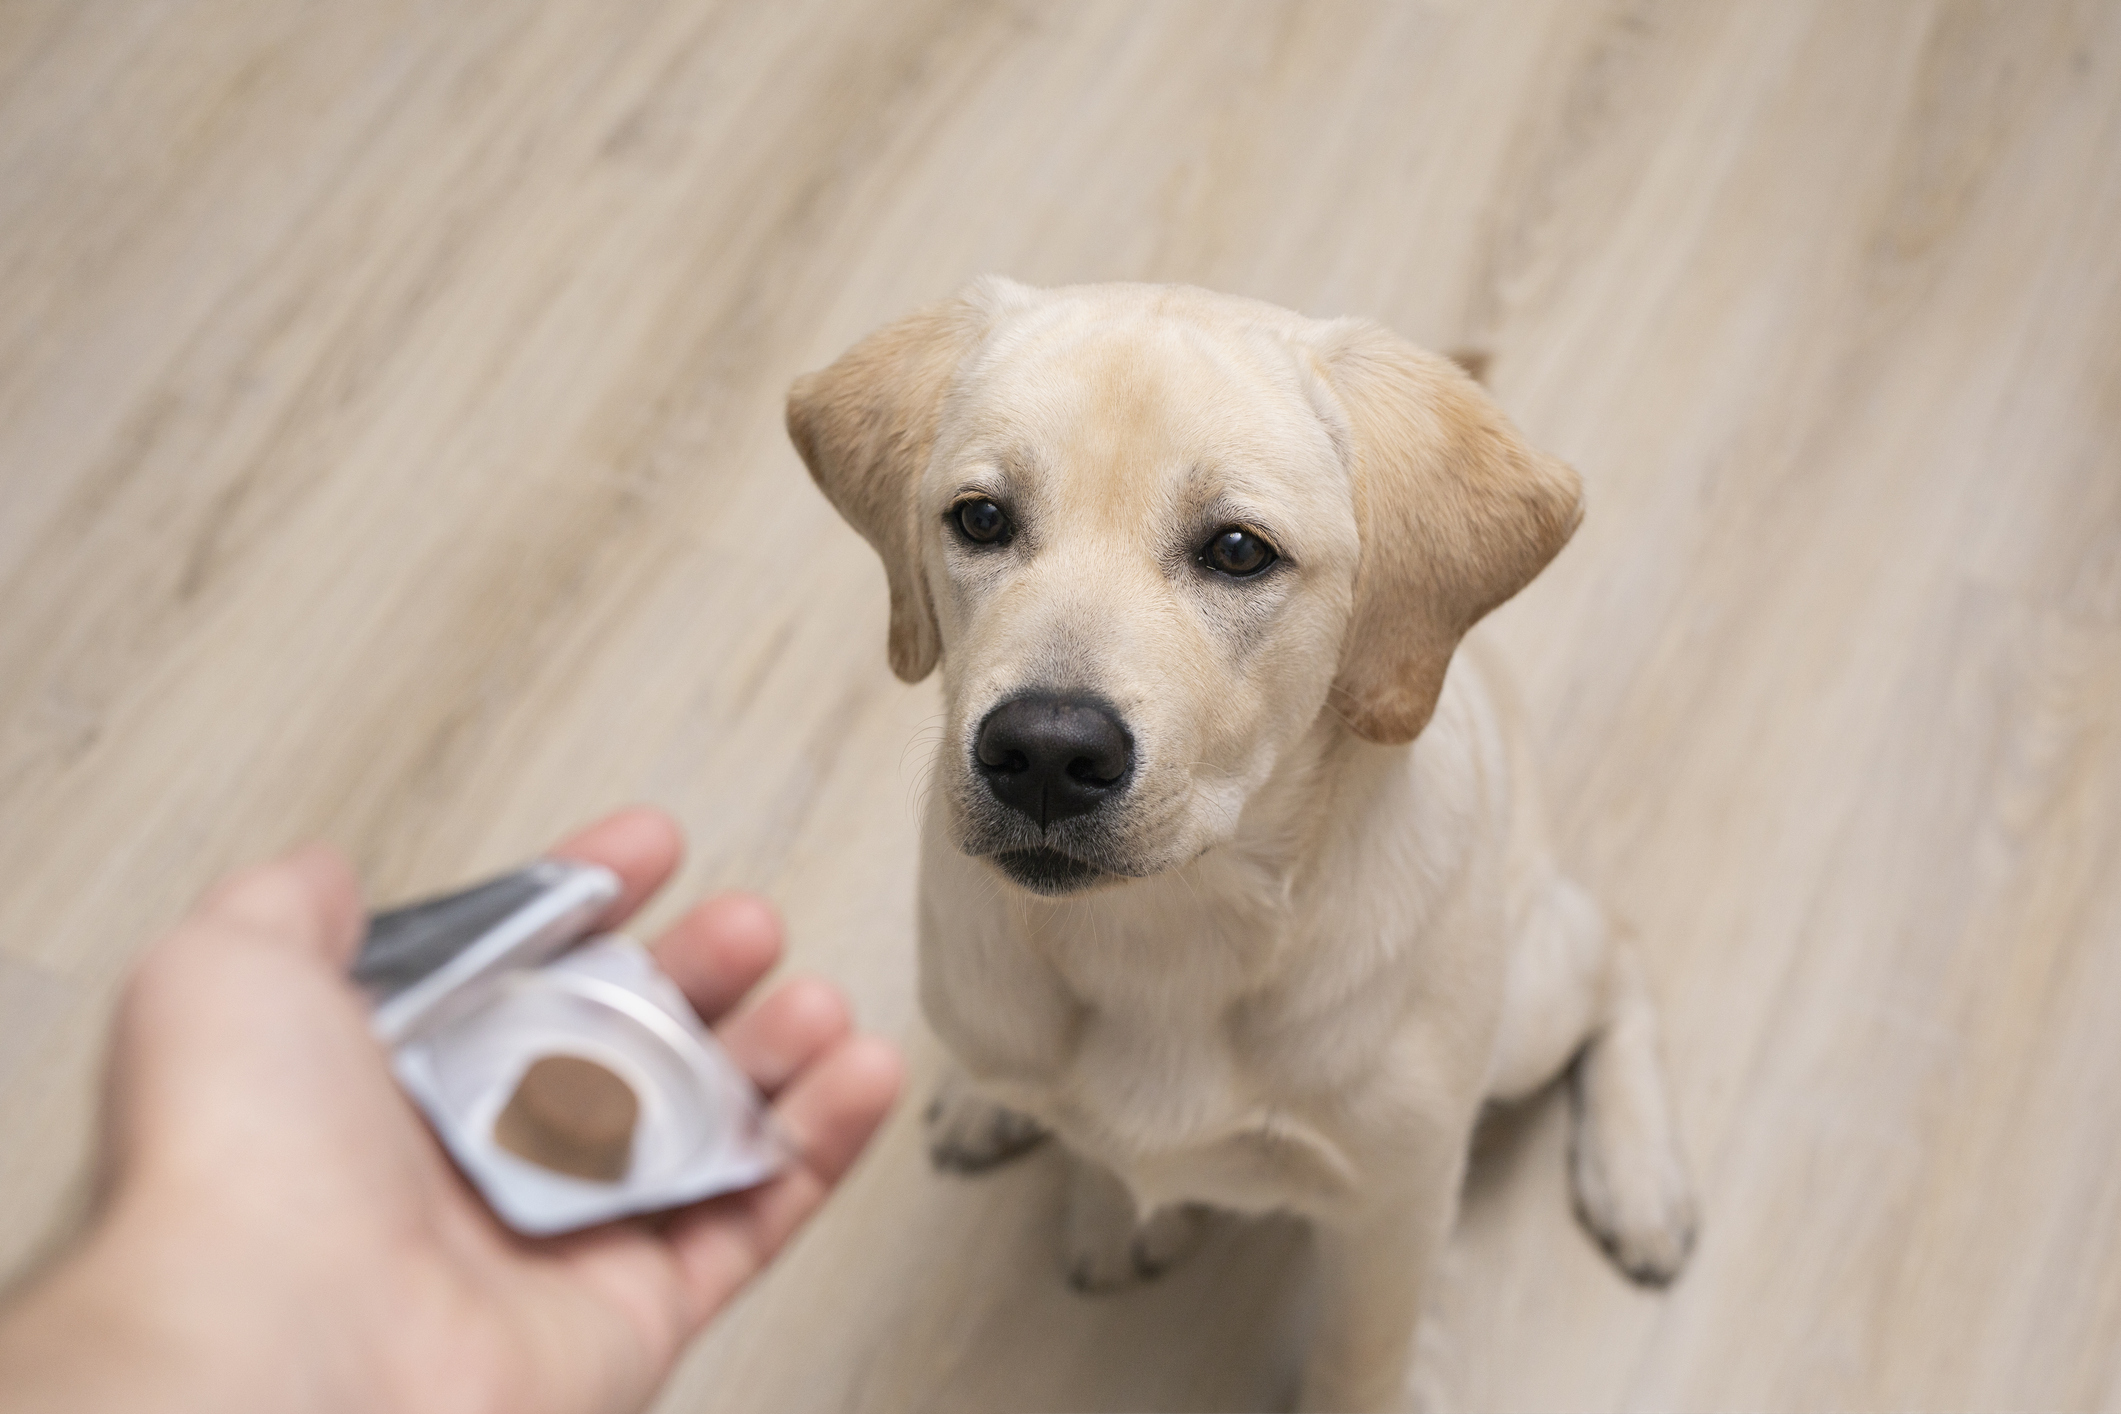 Pet supplement sales surged 21% in 2020: Report